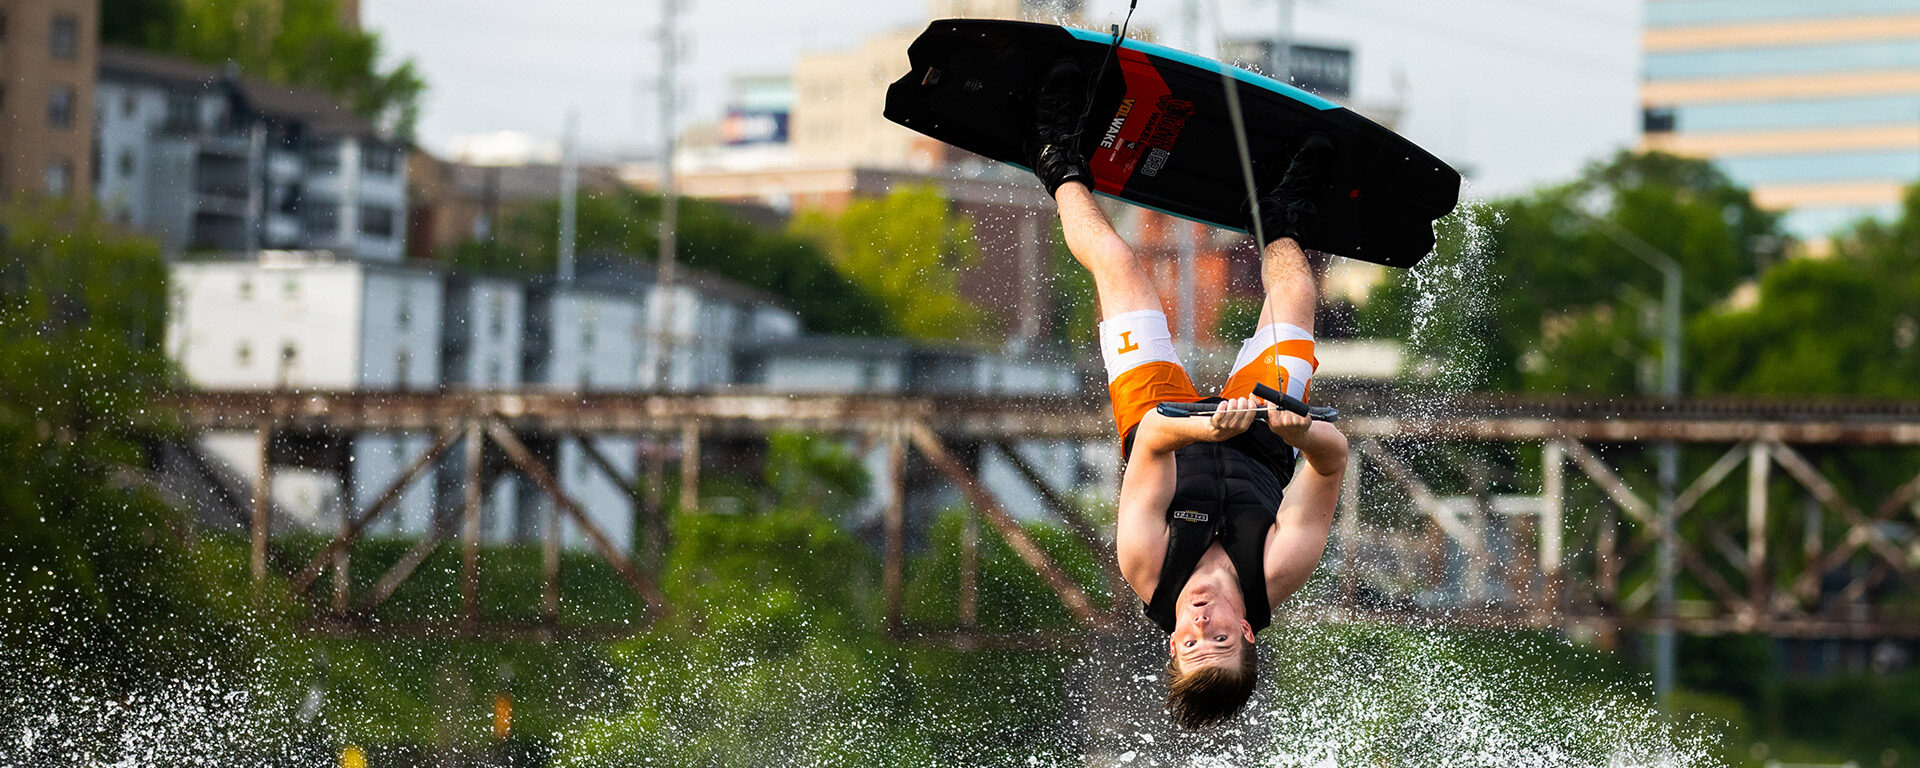 A UT Knoxville Volwake member turns a flip on his wakeboard during practice on the Tennessee River. Photo by Steven Bridges, University of Tennessee, Knoxville